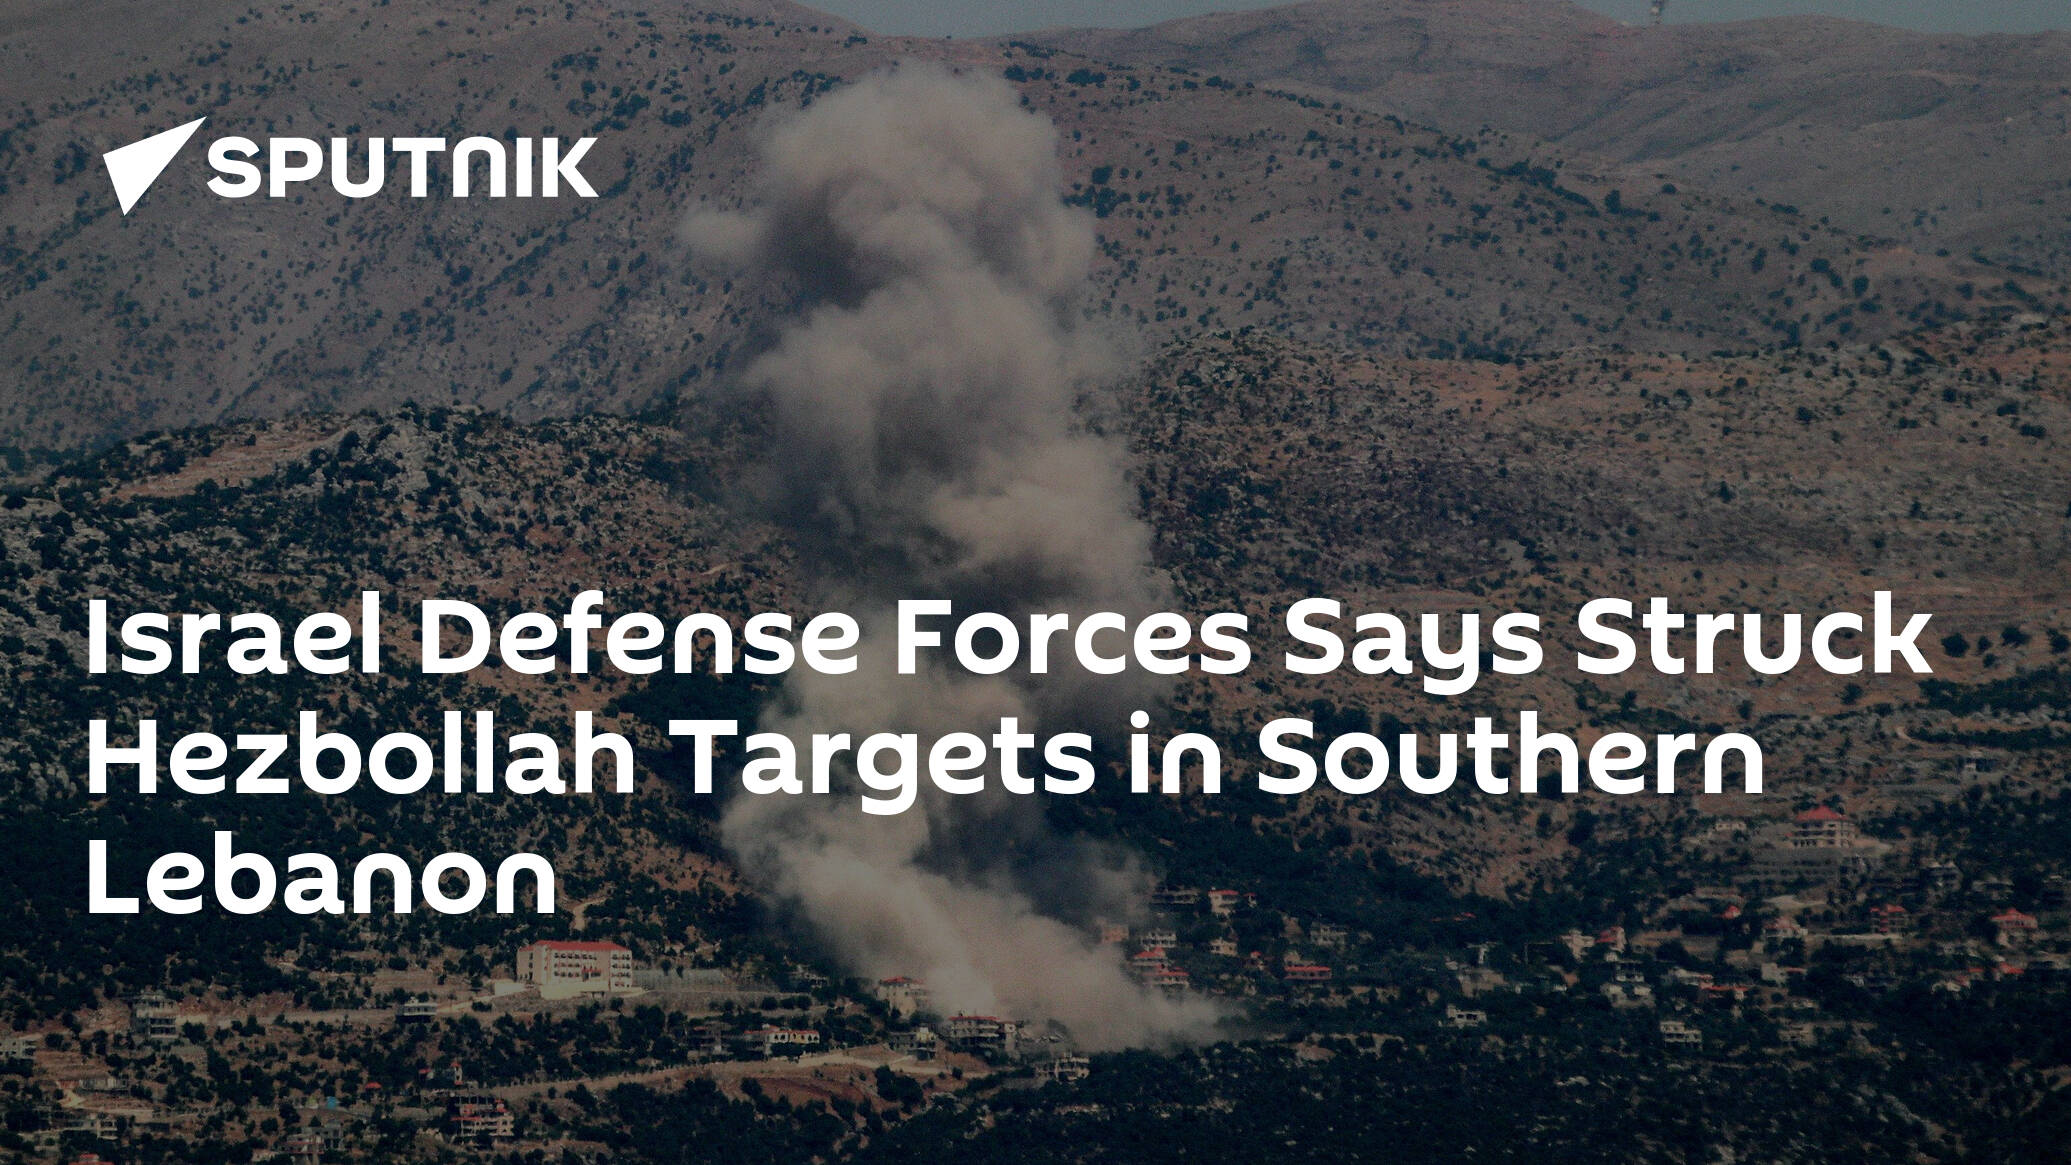 Israel Defense Forces Says Struck Hezbollah Targets in Southern Lebanon